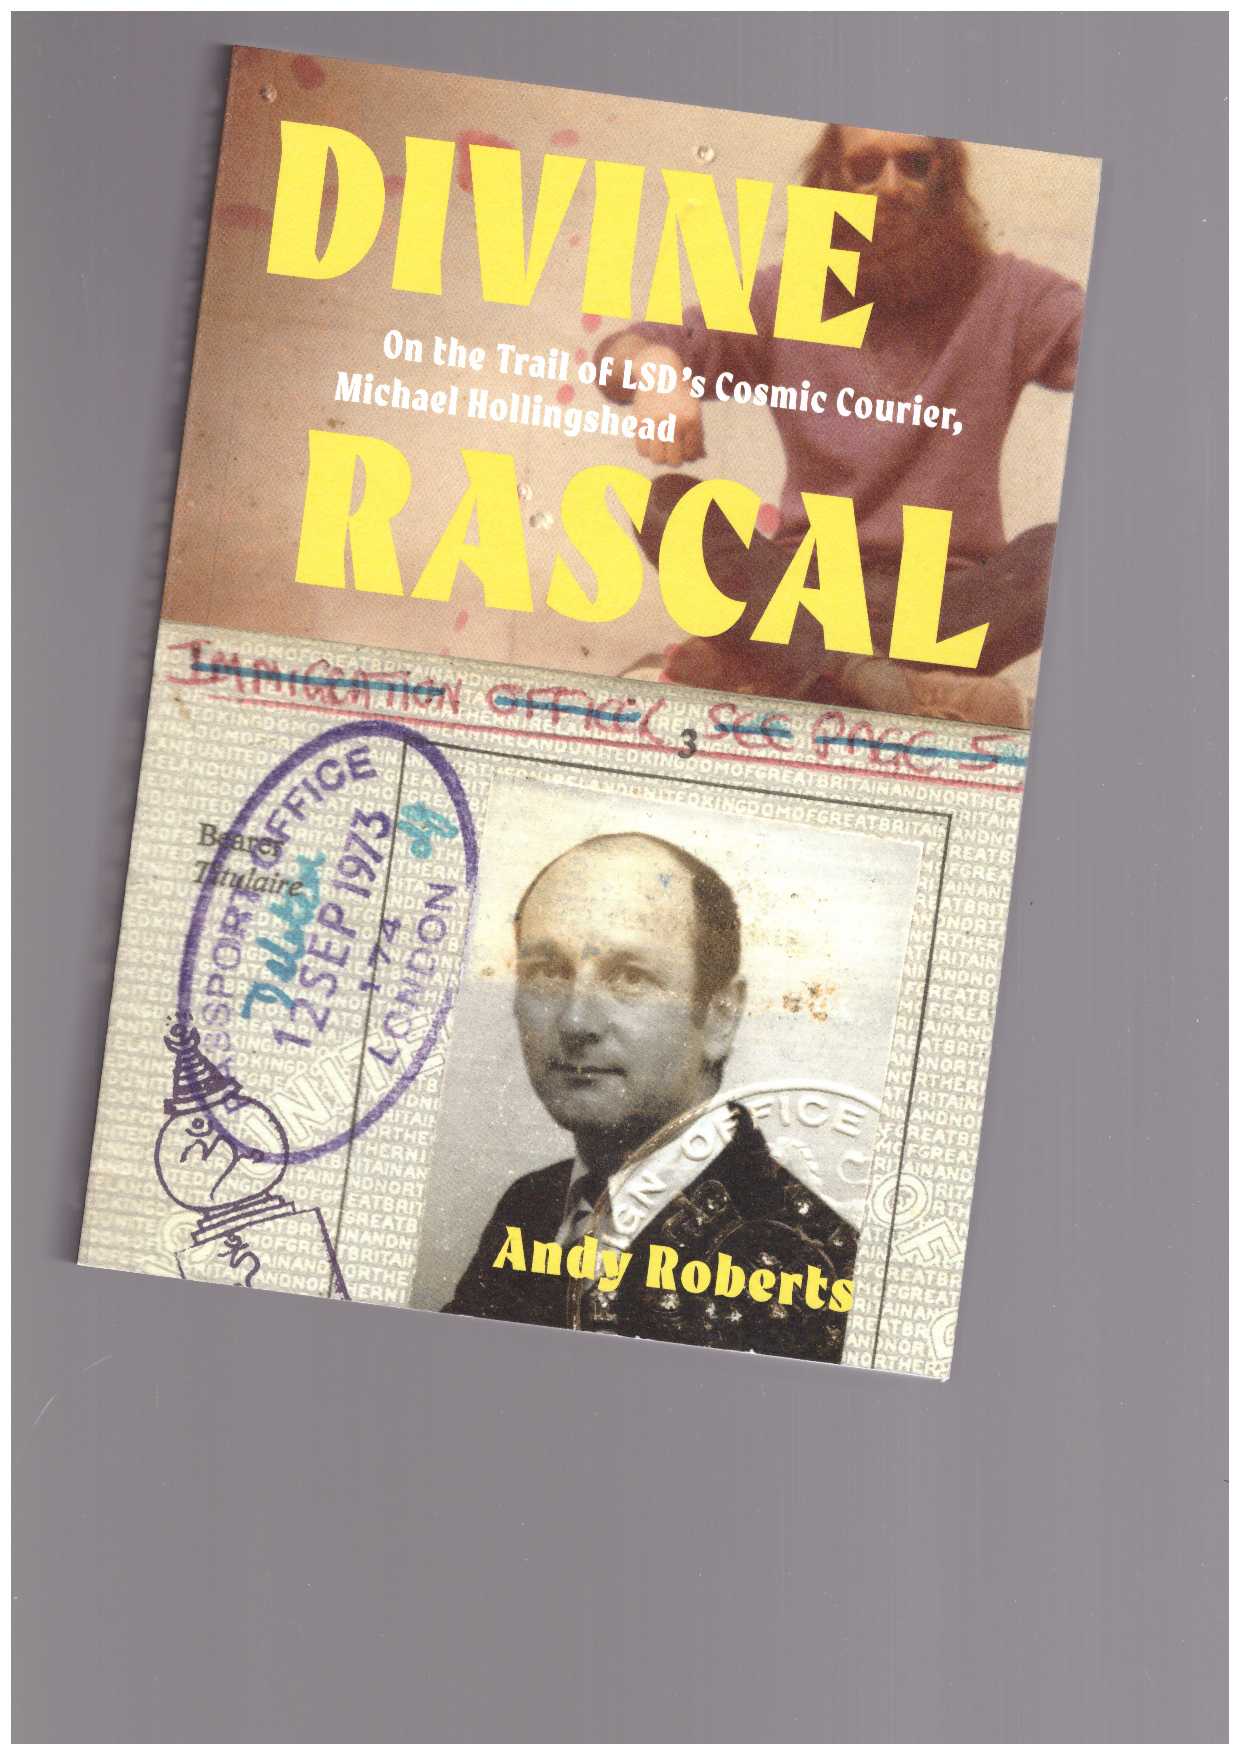 ROBERTS, Andy - Divine Rascal. On the Trail of LSD’s Cosmic Courier, Michael Hollingshead